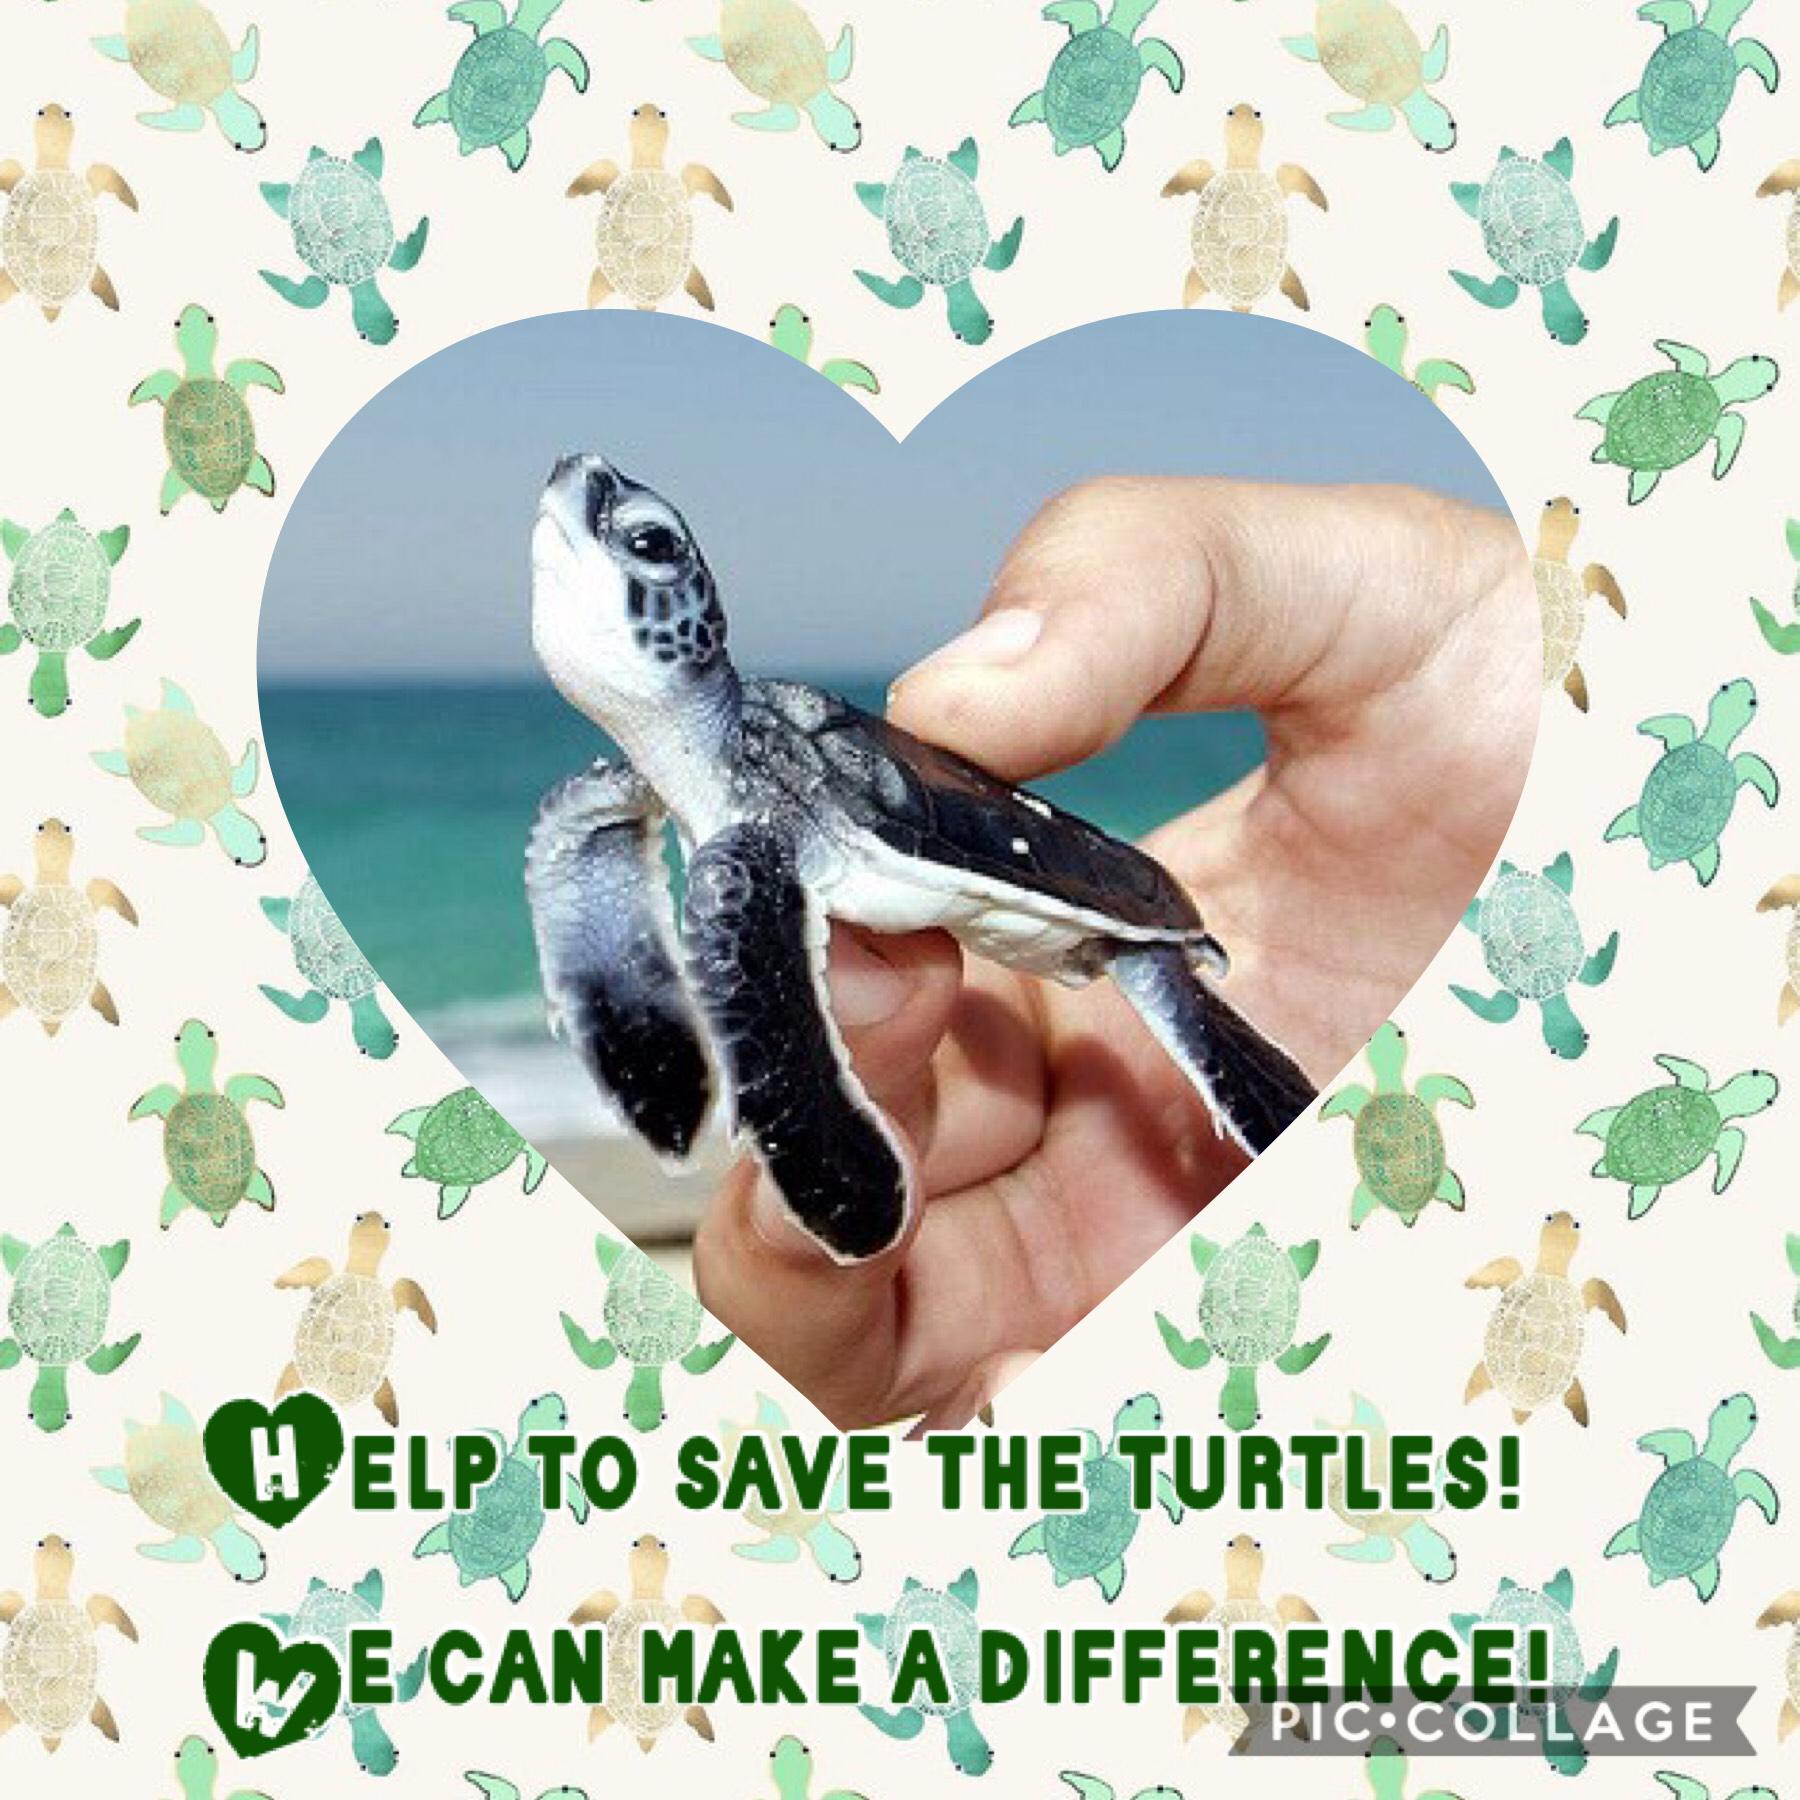 Please share this pic collage with other people to help save turtles 🐢!! Comment down below what you favorite animal is and like this pic collage!!